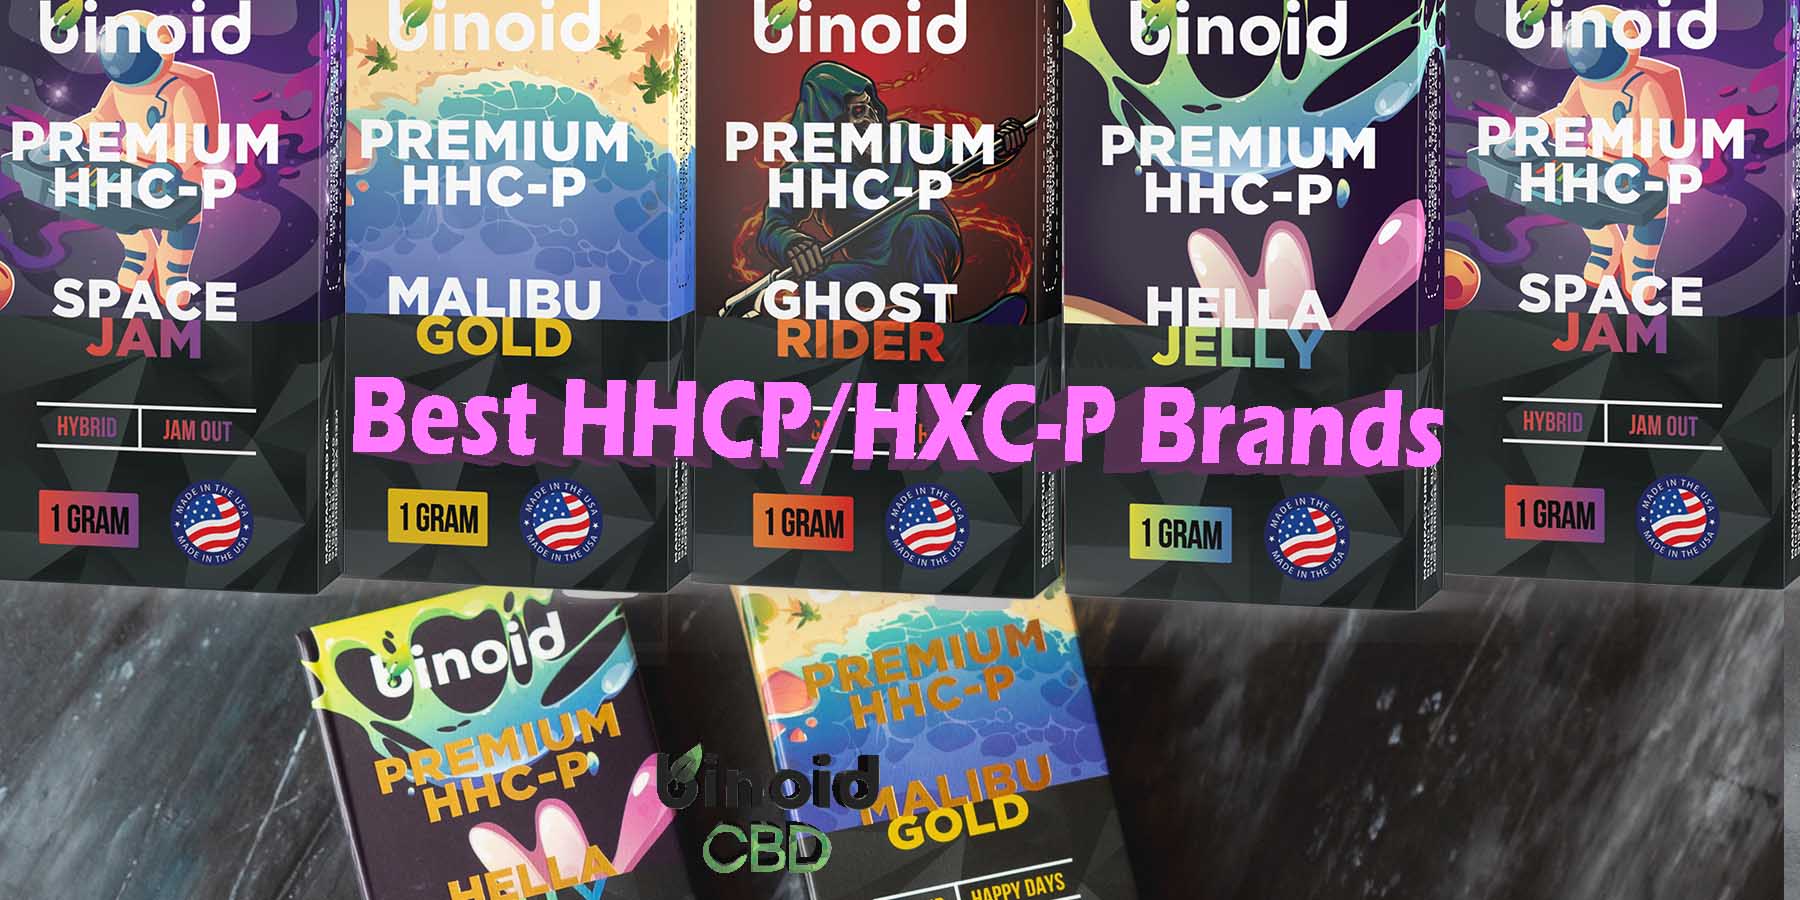 Best HHCP HXC-P Brands Best Disposable Cartridges Vape 2 Gram Review Gram Take Work Online Best Brand Price Get Near Me Lowest Coupon Discount Store Shop Vapes Carts Online